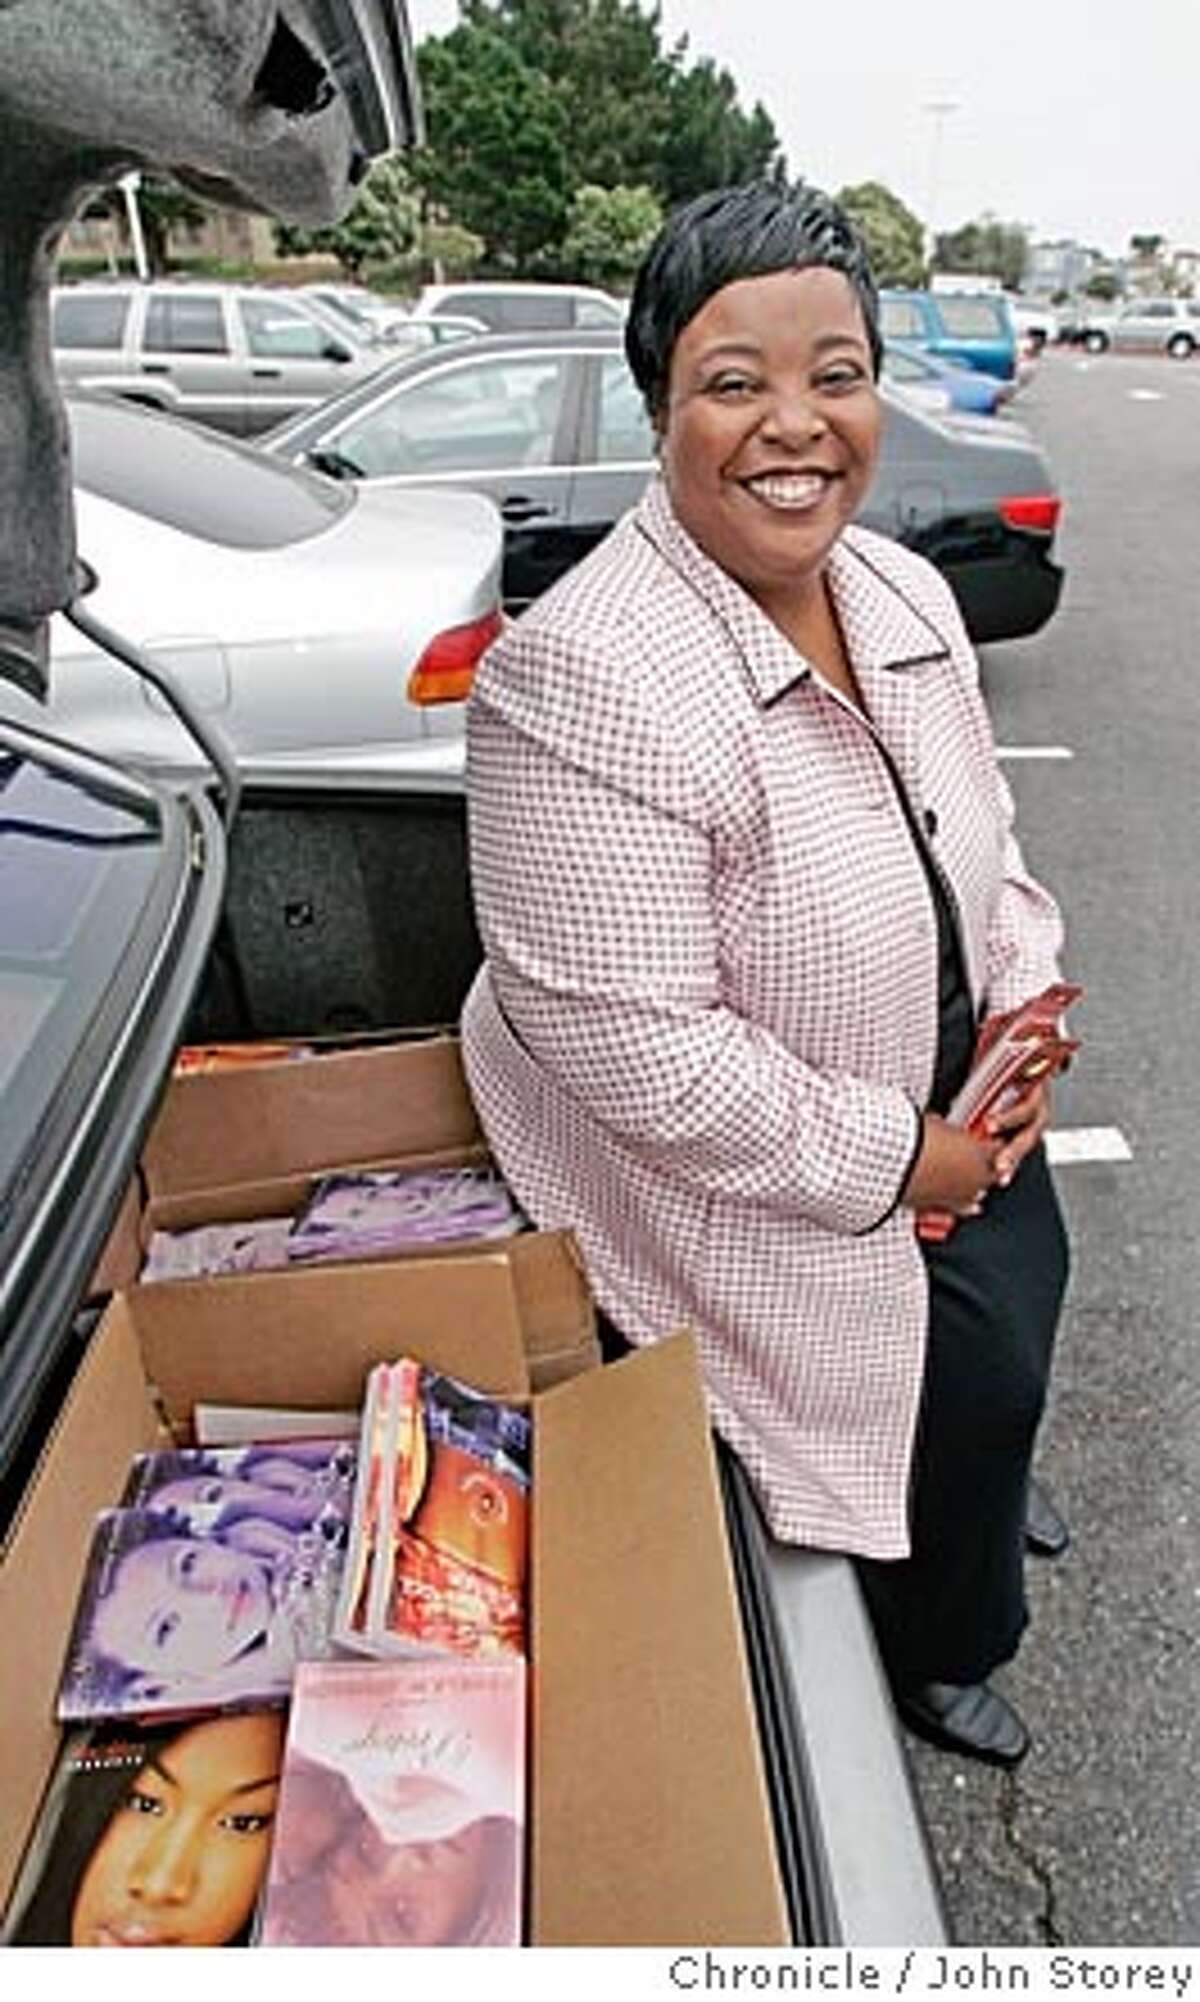 Pamela Johnson sits on the trunk of her BMW where she keeps her books. Author Pamela Johnson sells her books from the truck in her car at Stonestown shopping center and she hands out bookmarks and sells books inside the mall. John Storey San Francisco Event on 9/6/05 -